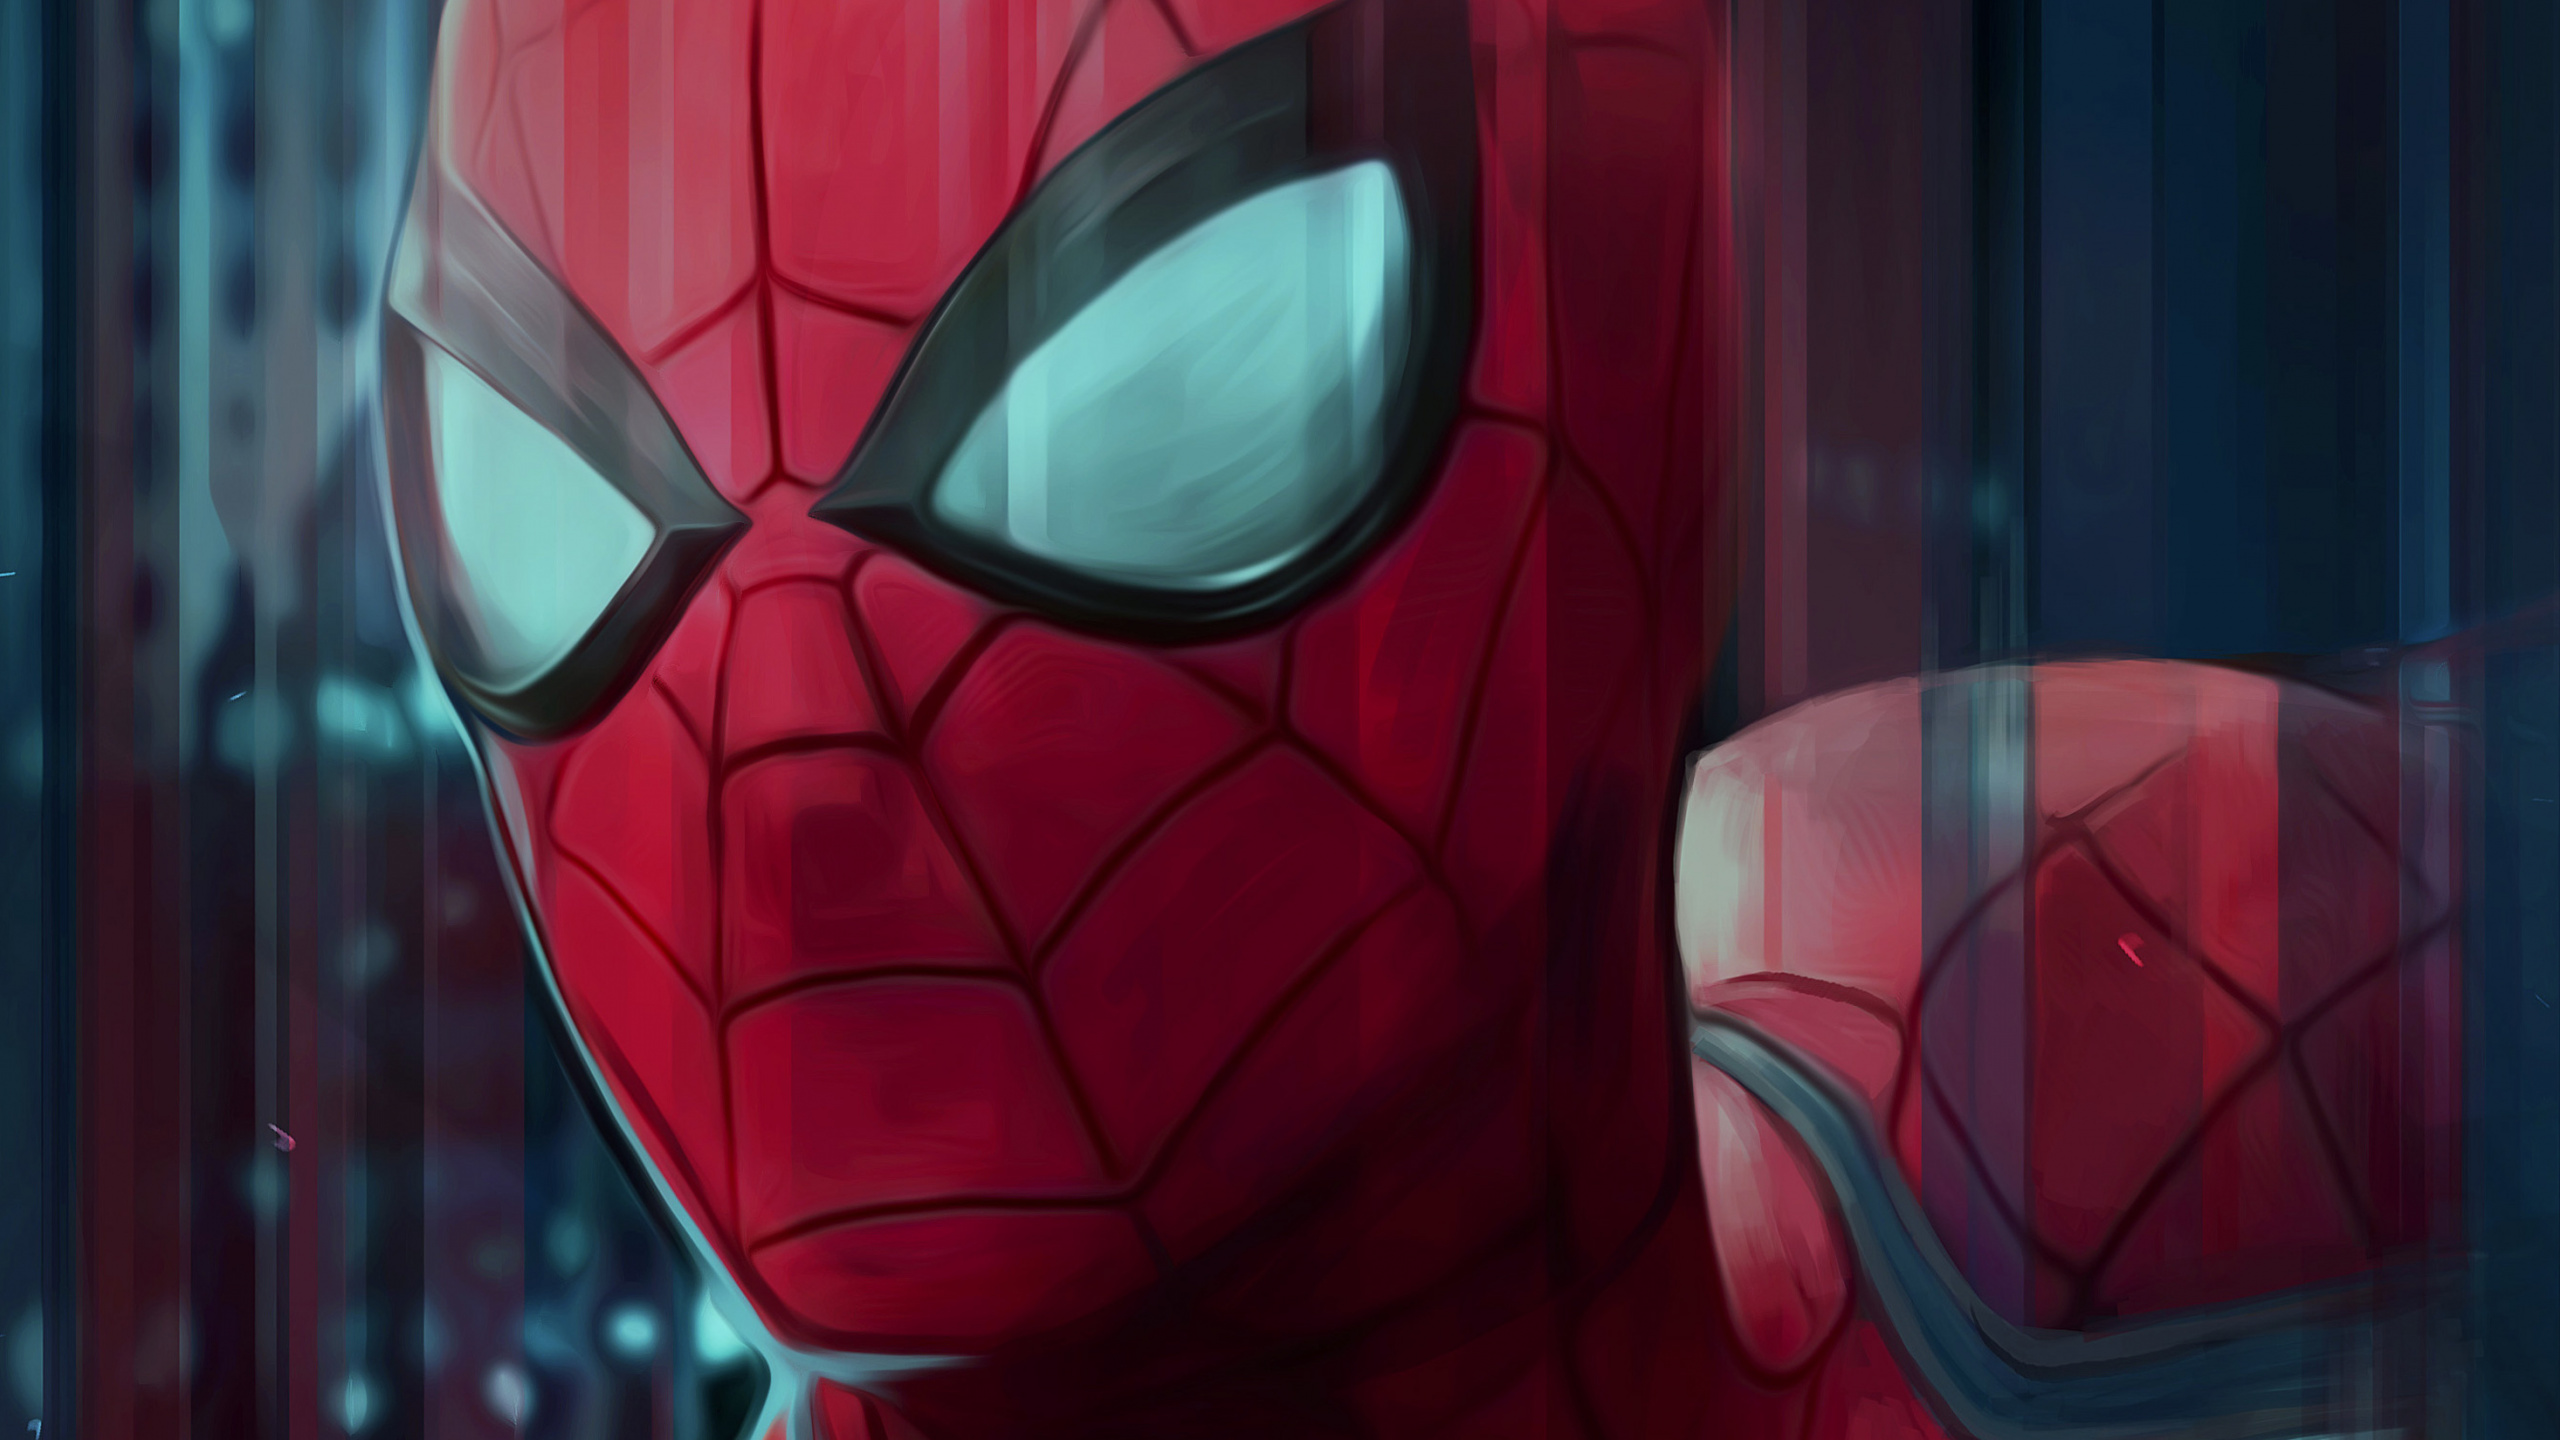 Red Spider Man Costume in Front of Glass Window. Wallpaper in 2560x1440 Resolution